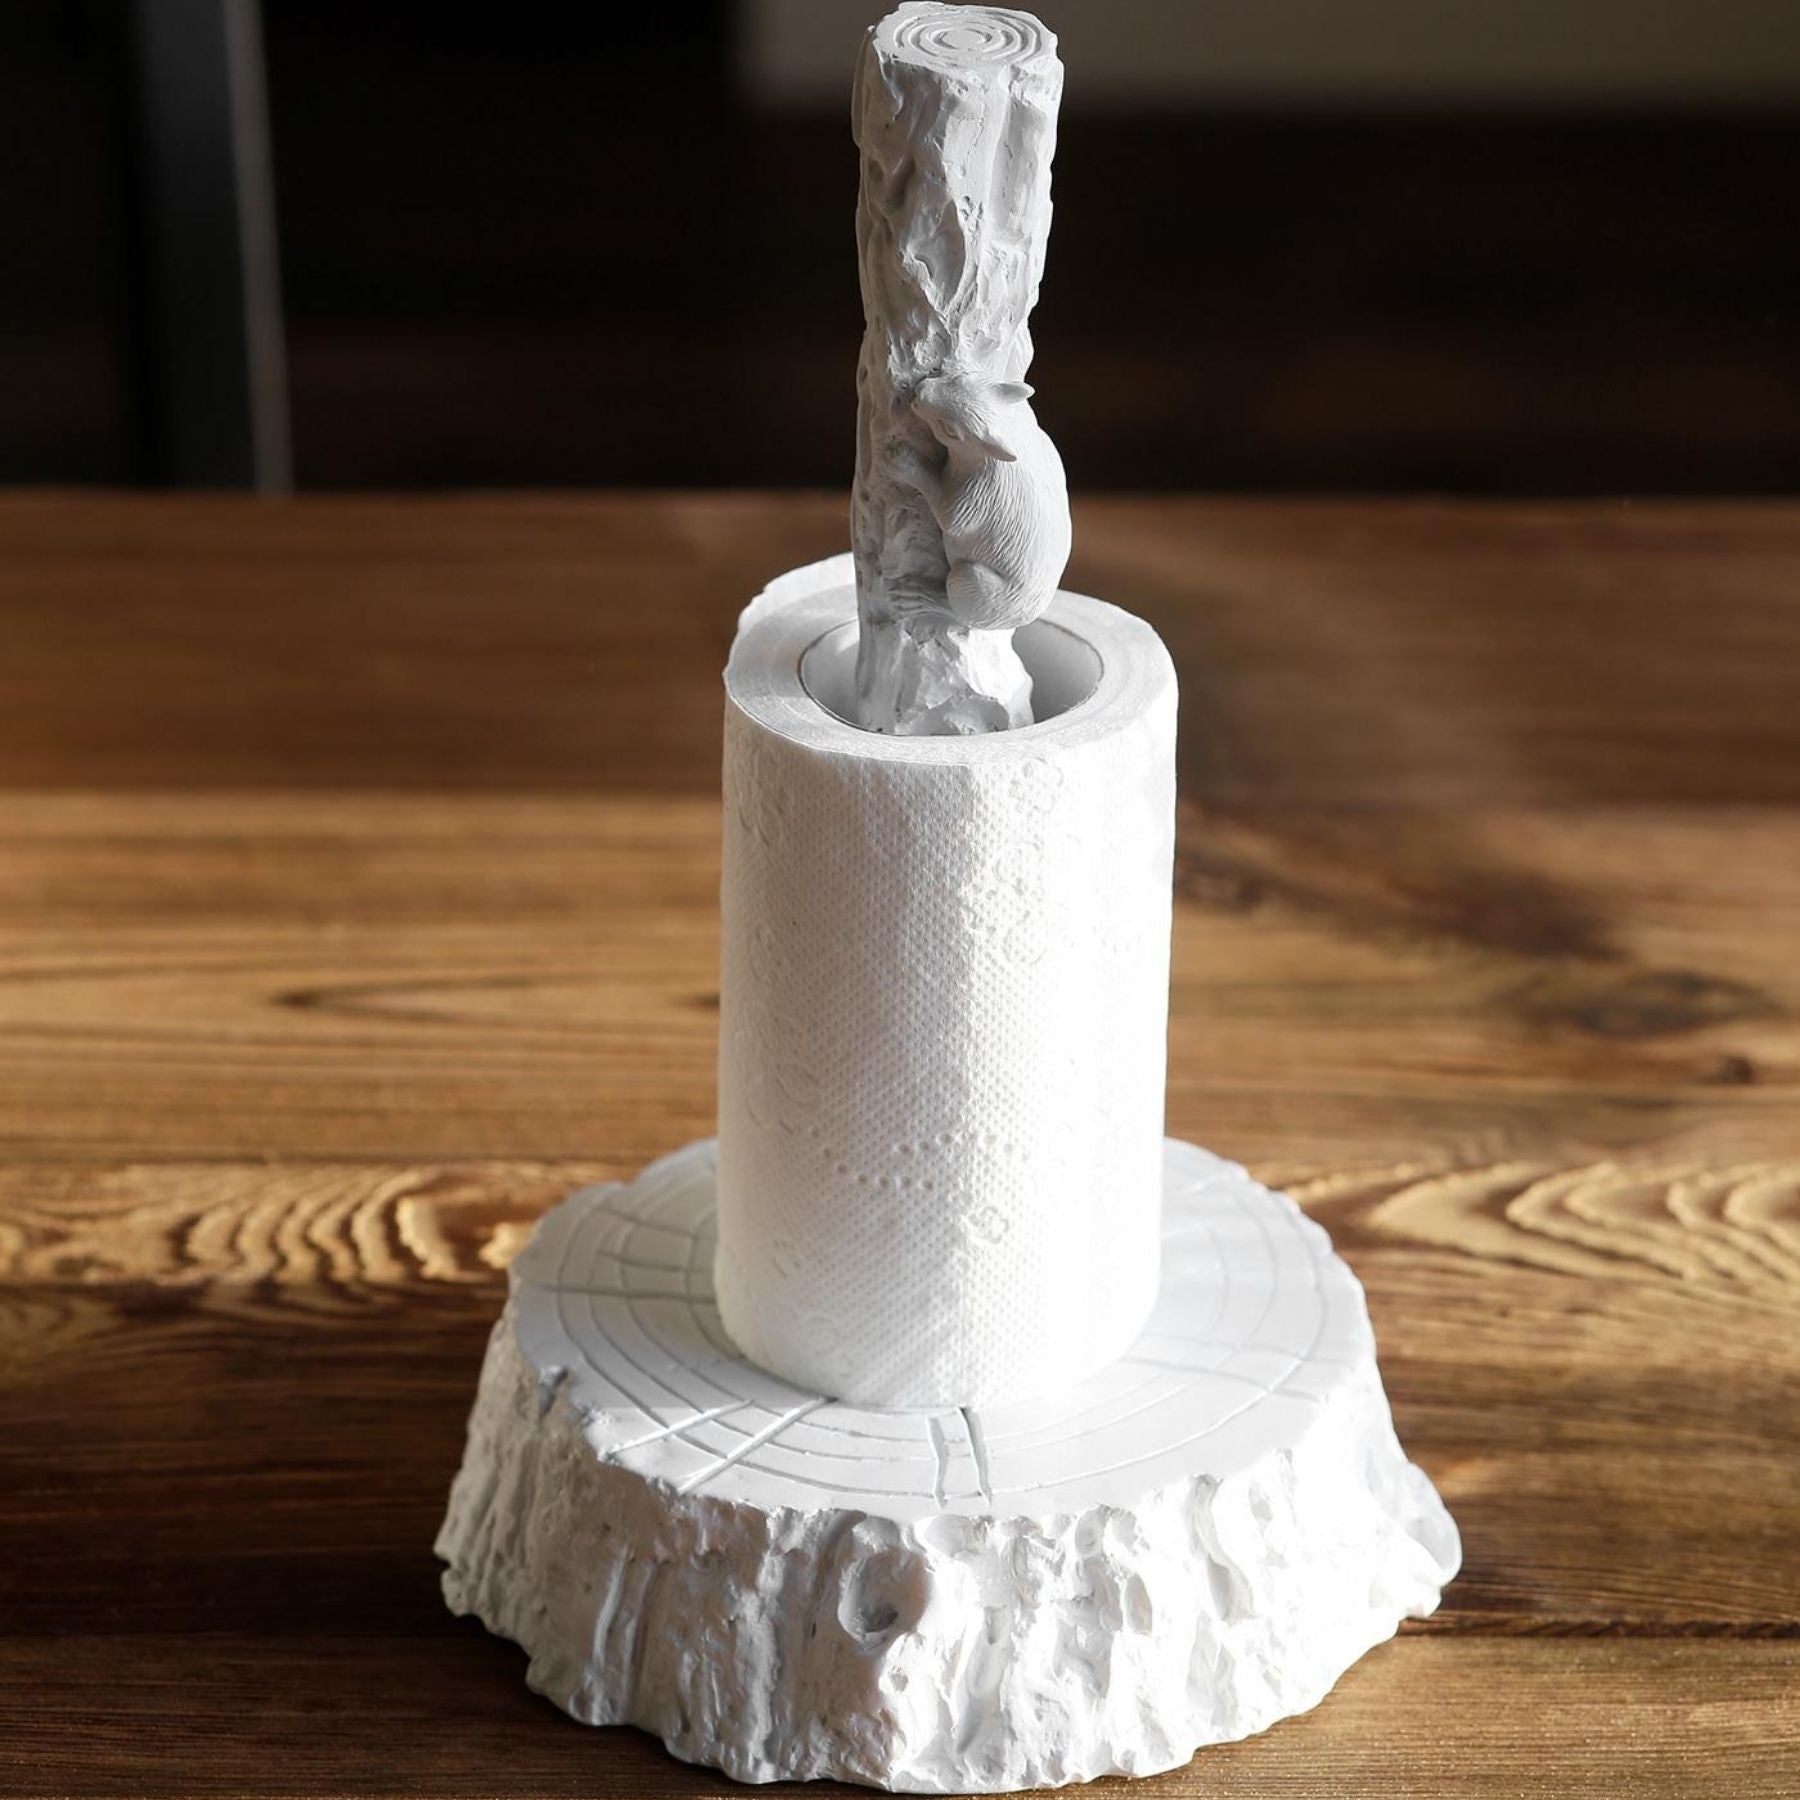 Decorative and Standing Paper Towel Holder with Squirrel Ornament